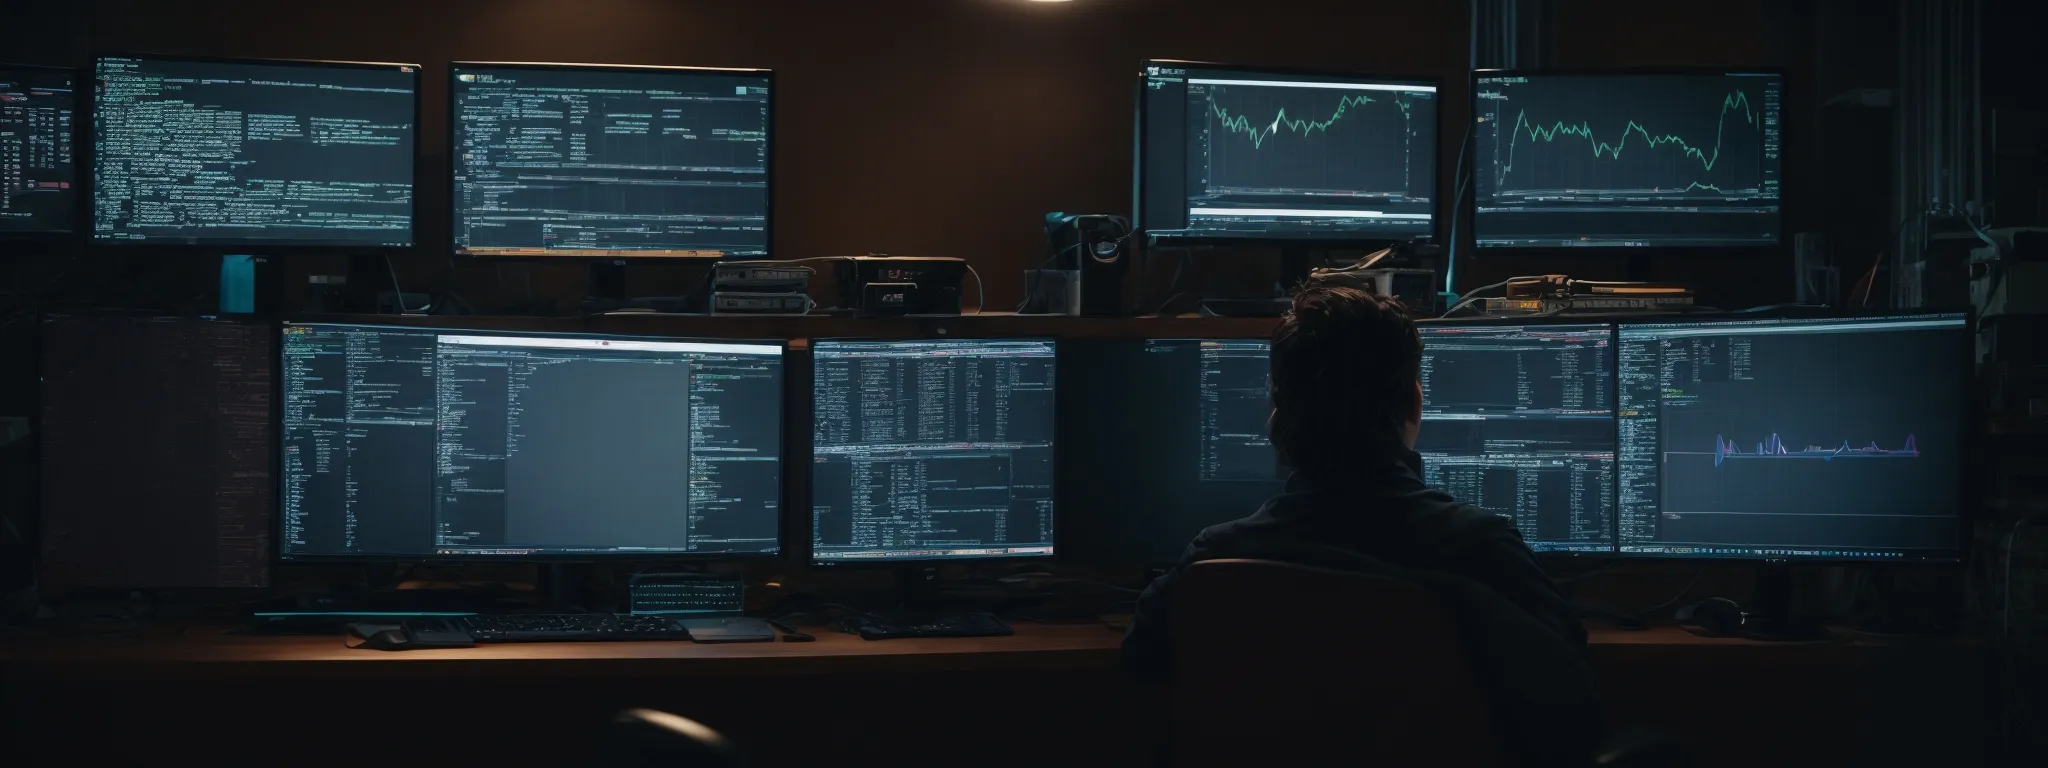 a programmer sits before dual monitors displaying website code and analytics graphs, reflecting the process of automating seo audits with python.